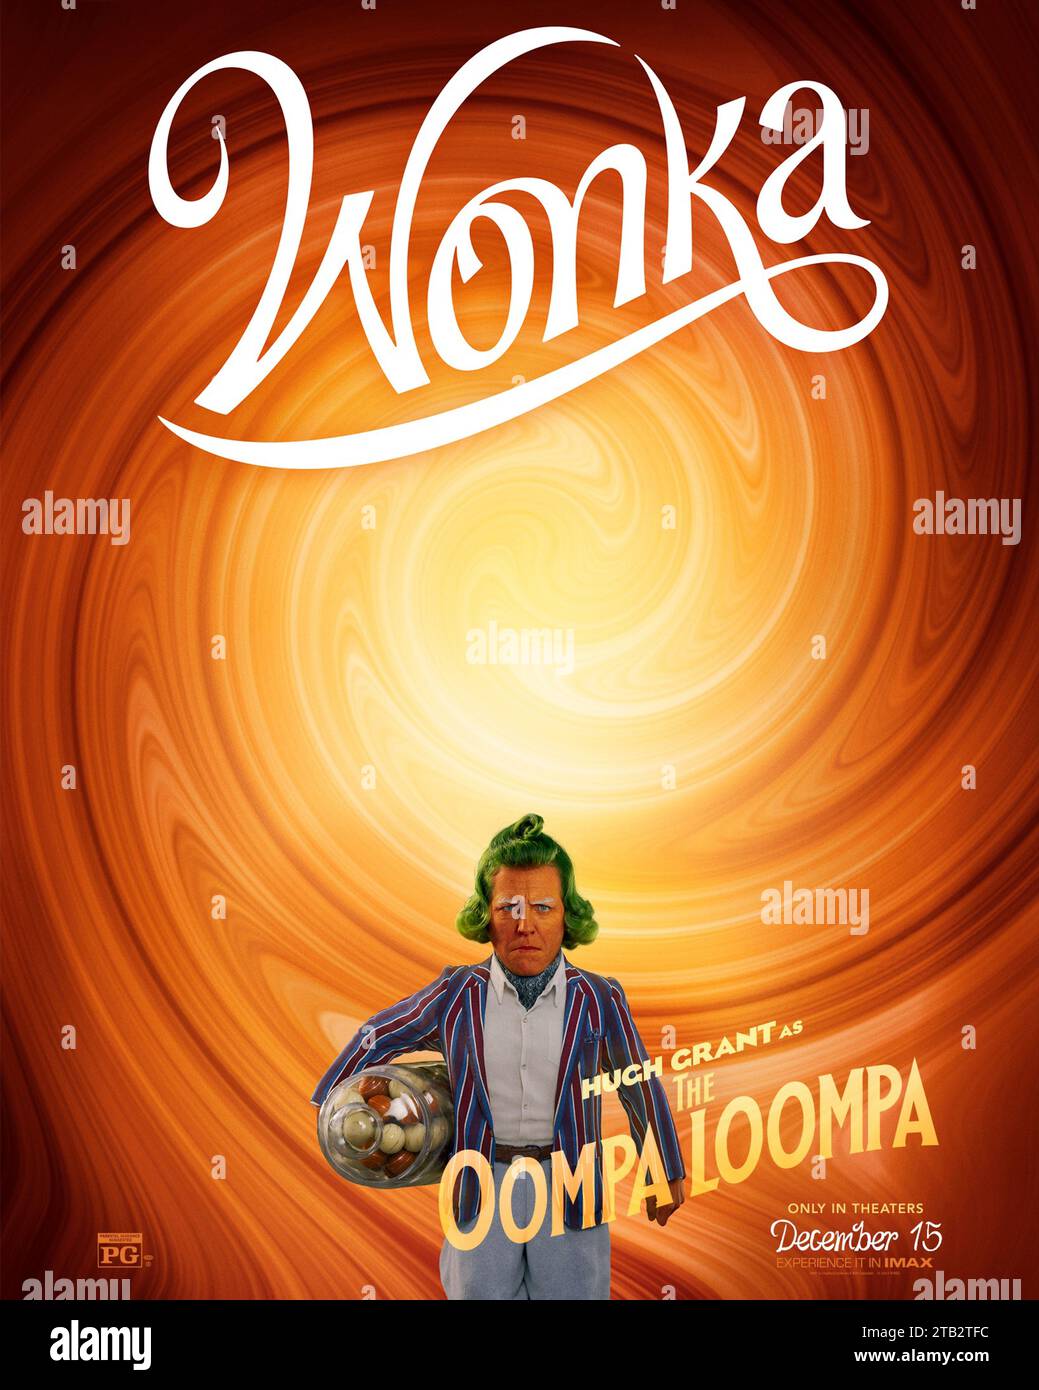 Wonka (2023) directed by Paul King and starring Hugh Grant as the Oompa Loompa. Prequel about the early life of Willie Wonka the much loved children's character from Roald Dahl's Charlie and the Chocolate Factory. US character poster***EDITORIAL USE ONLY***. Credit: BFA / Warner Bros Stock Photo